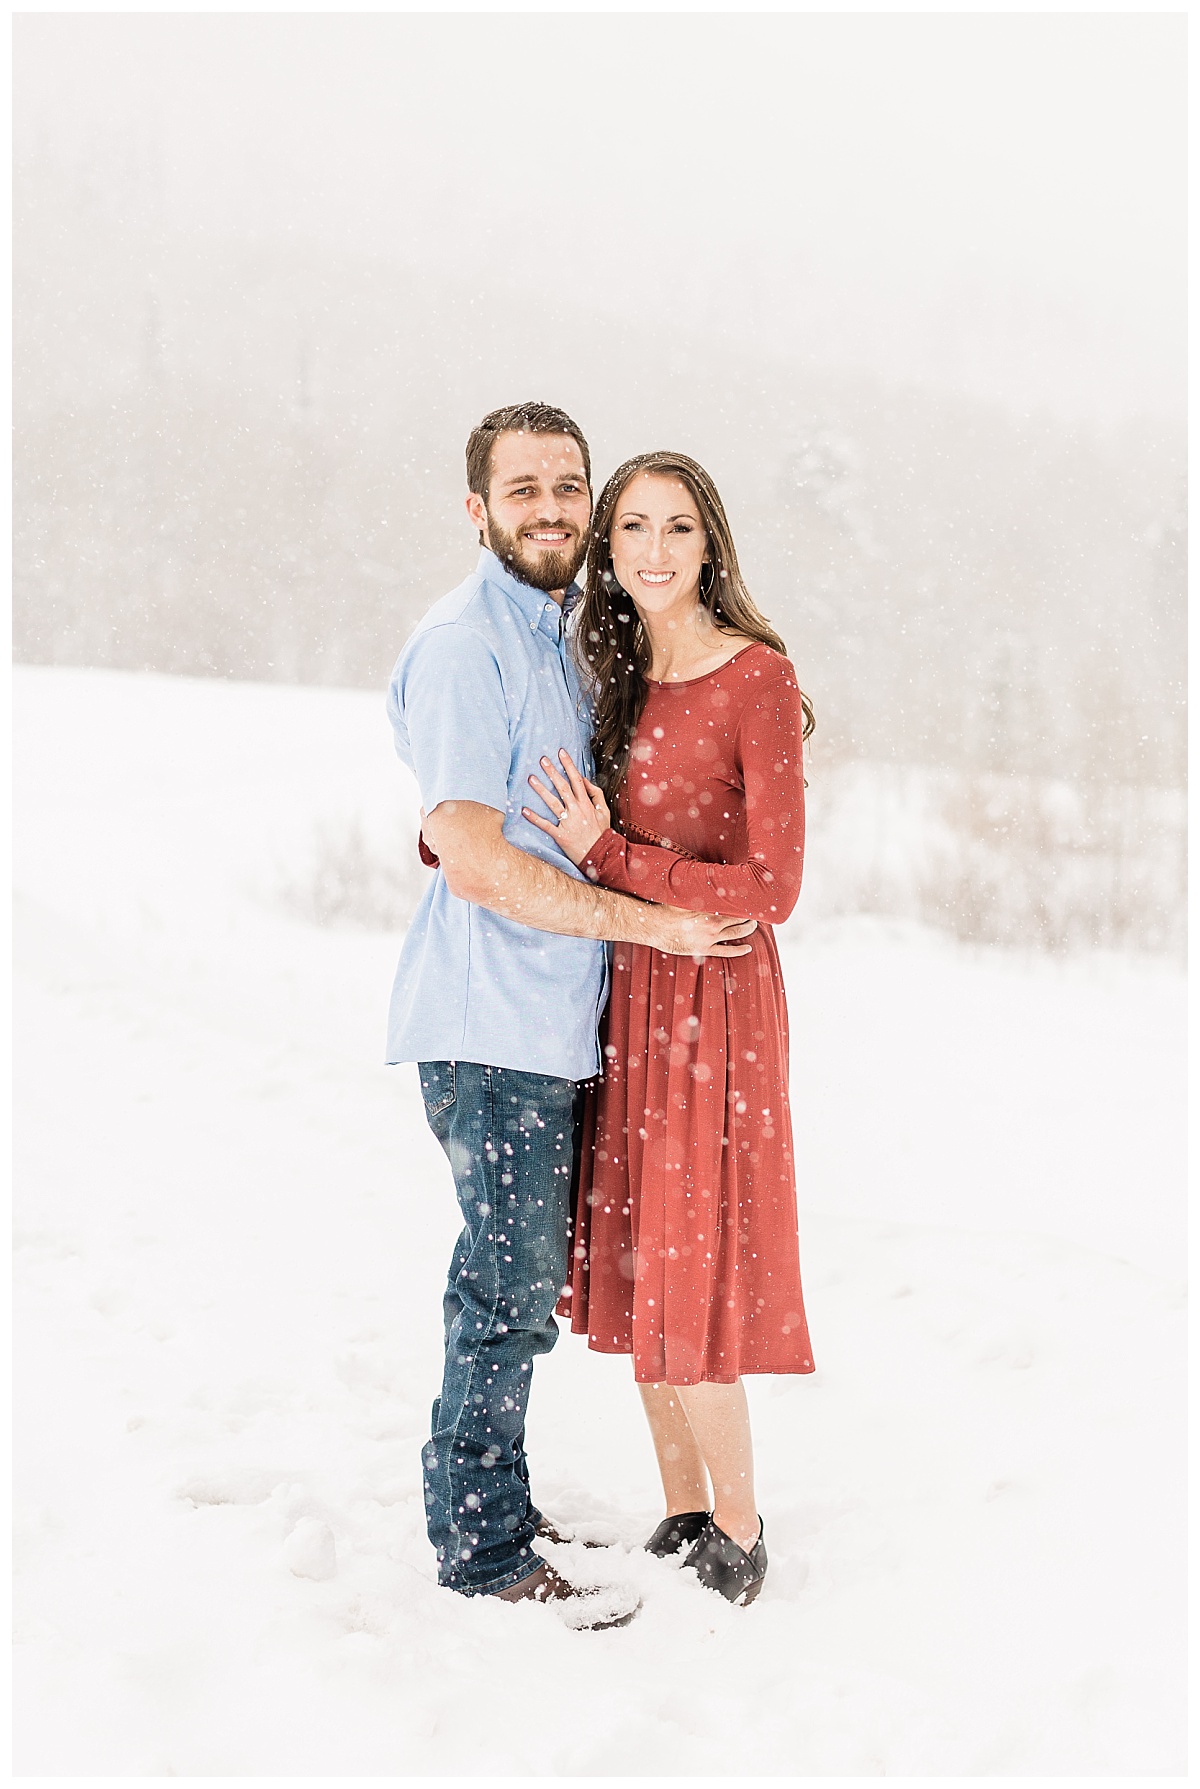 SNOWY TUNNEL SPRINGS ENGAGEMENTS